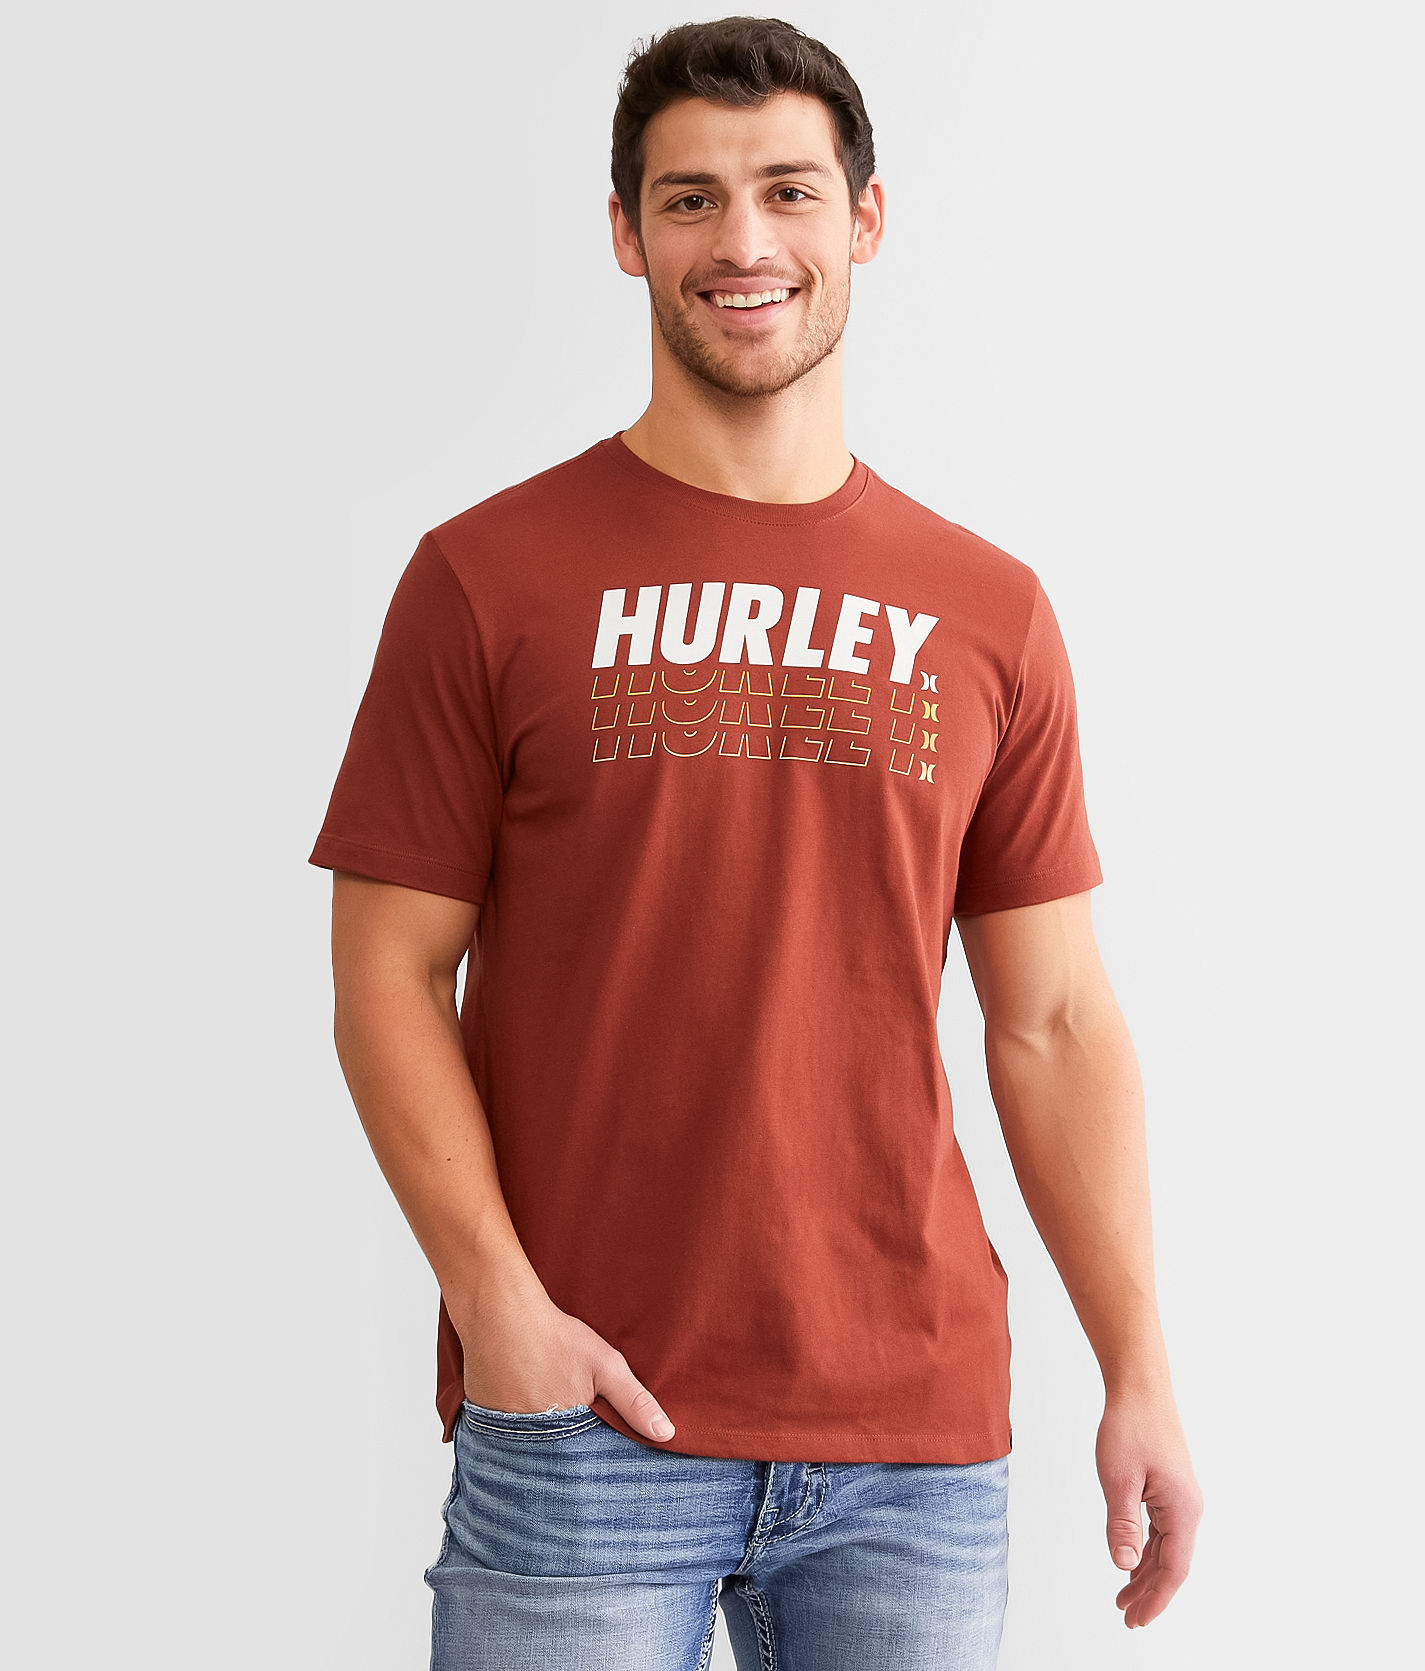 30 Gnarly Facts About Hurley )( - The Fact Shop